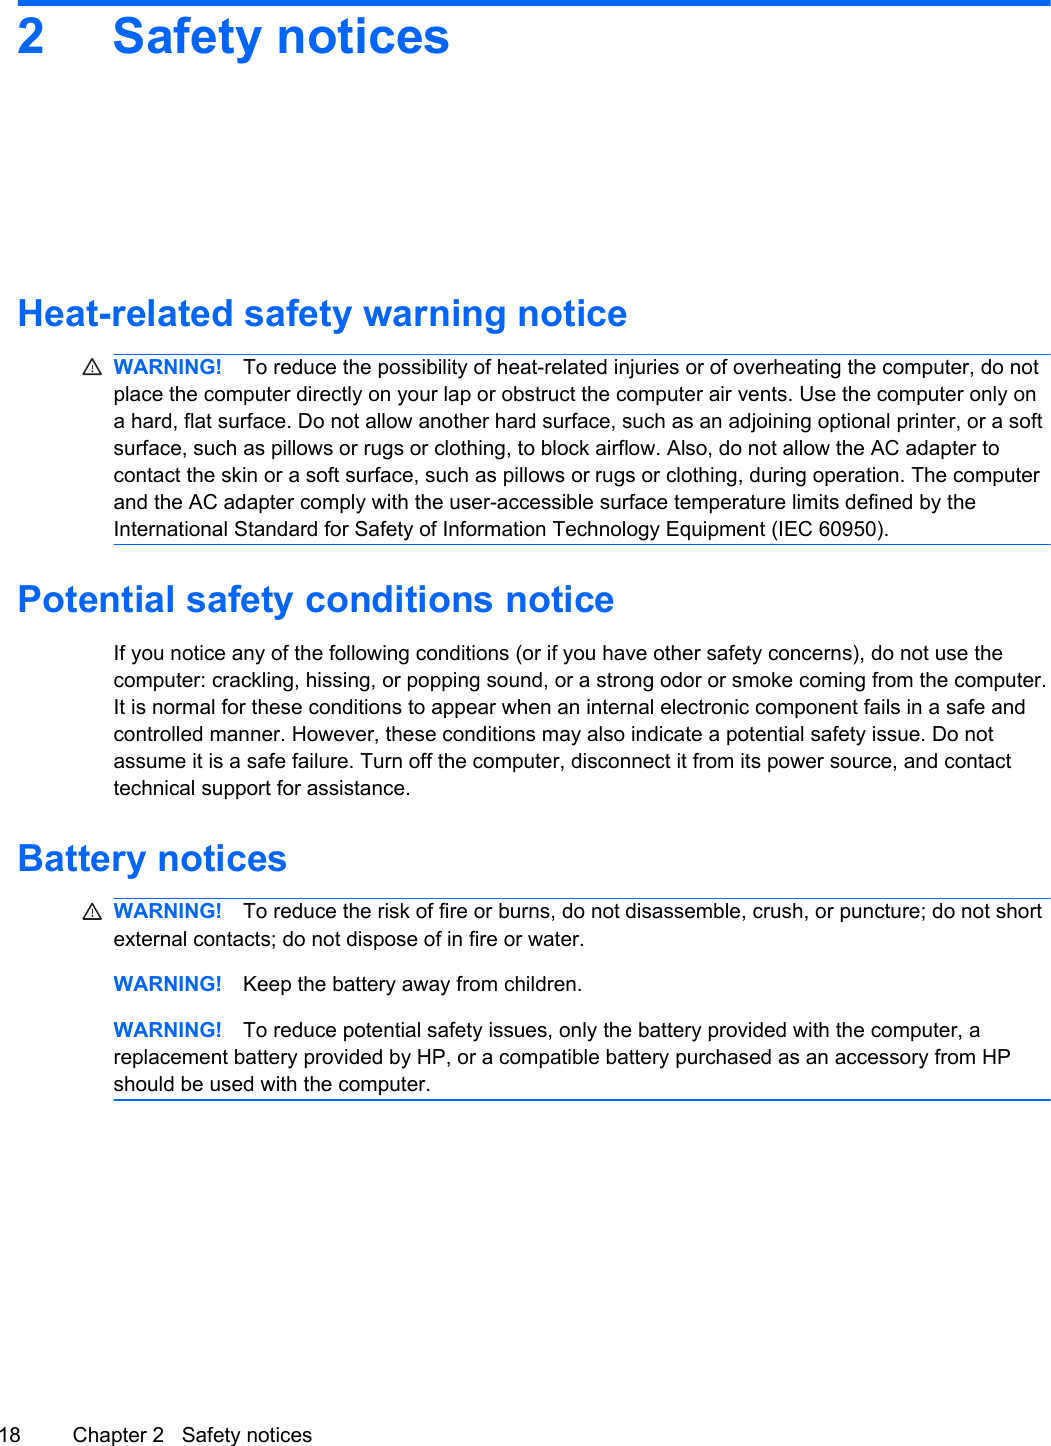 2 Safety noticesHeat-related safety warning noticeWARNING! To reduce the possibility of heat-related injuries or of overheating the computer, do notplace the computer directly on your lap or obstruct the computer air vents. Use the computer only ona hard, flat surface. Do not allow another hard surface, such as an adjoining optional printer, or a softsurface, such as pillows or rugs or clothing, to block airflow. Also, do not allow the AC adapter tocontact the skin or a soft surface, such as pillows or rugs or clothing, during operation. The computerand the AC adapter comply with the user-accessible surface temperature limits defined by theInternational Standard for Safety of Information Technology Equipment (IEC 60950).Potential safety conditions noticeIf you notice any of the following conditions (or if you have other safety concerns), do not use thecomputer: crackling, hissing, or popping sound, or a strong odor or smoke coming from the computer.It is normal for these conditions to appear when an internal electronic component fails in a safe andcontrolled manner. However, these conditions may also indicate a potential safety issue. Do notassume it is a safe failure. Turn off the computer, disconnect it from its power source, and contacttechnical support for assistance.Battery noticesWARNING! To reduce the risk of fire or burns, do not disassemble, crush, or puncture; do not shortexternal contacts; do not dispose of in fire or water.WARNING! Keep the battery away from children.WARNING! To reduce potential safety issues, only the battery provided with the computer, areplacement battery provided by HP, or a compatible battery purchased as an accessory from HPshould be used with the computer.18 Chapter 2   Safety notices